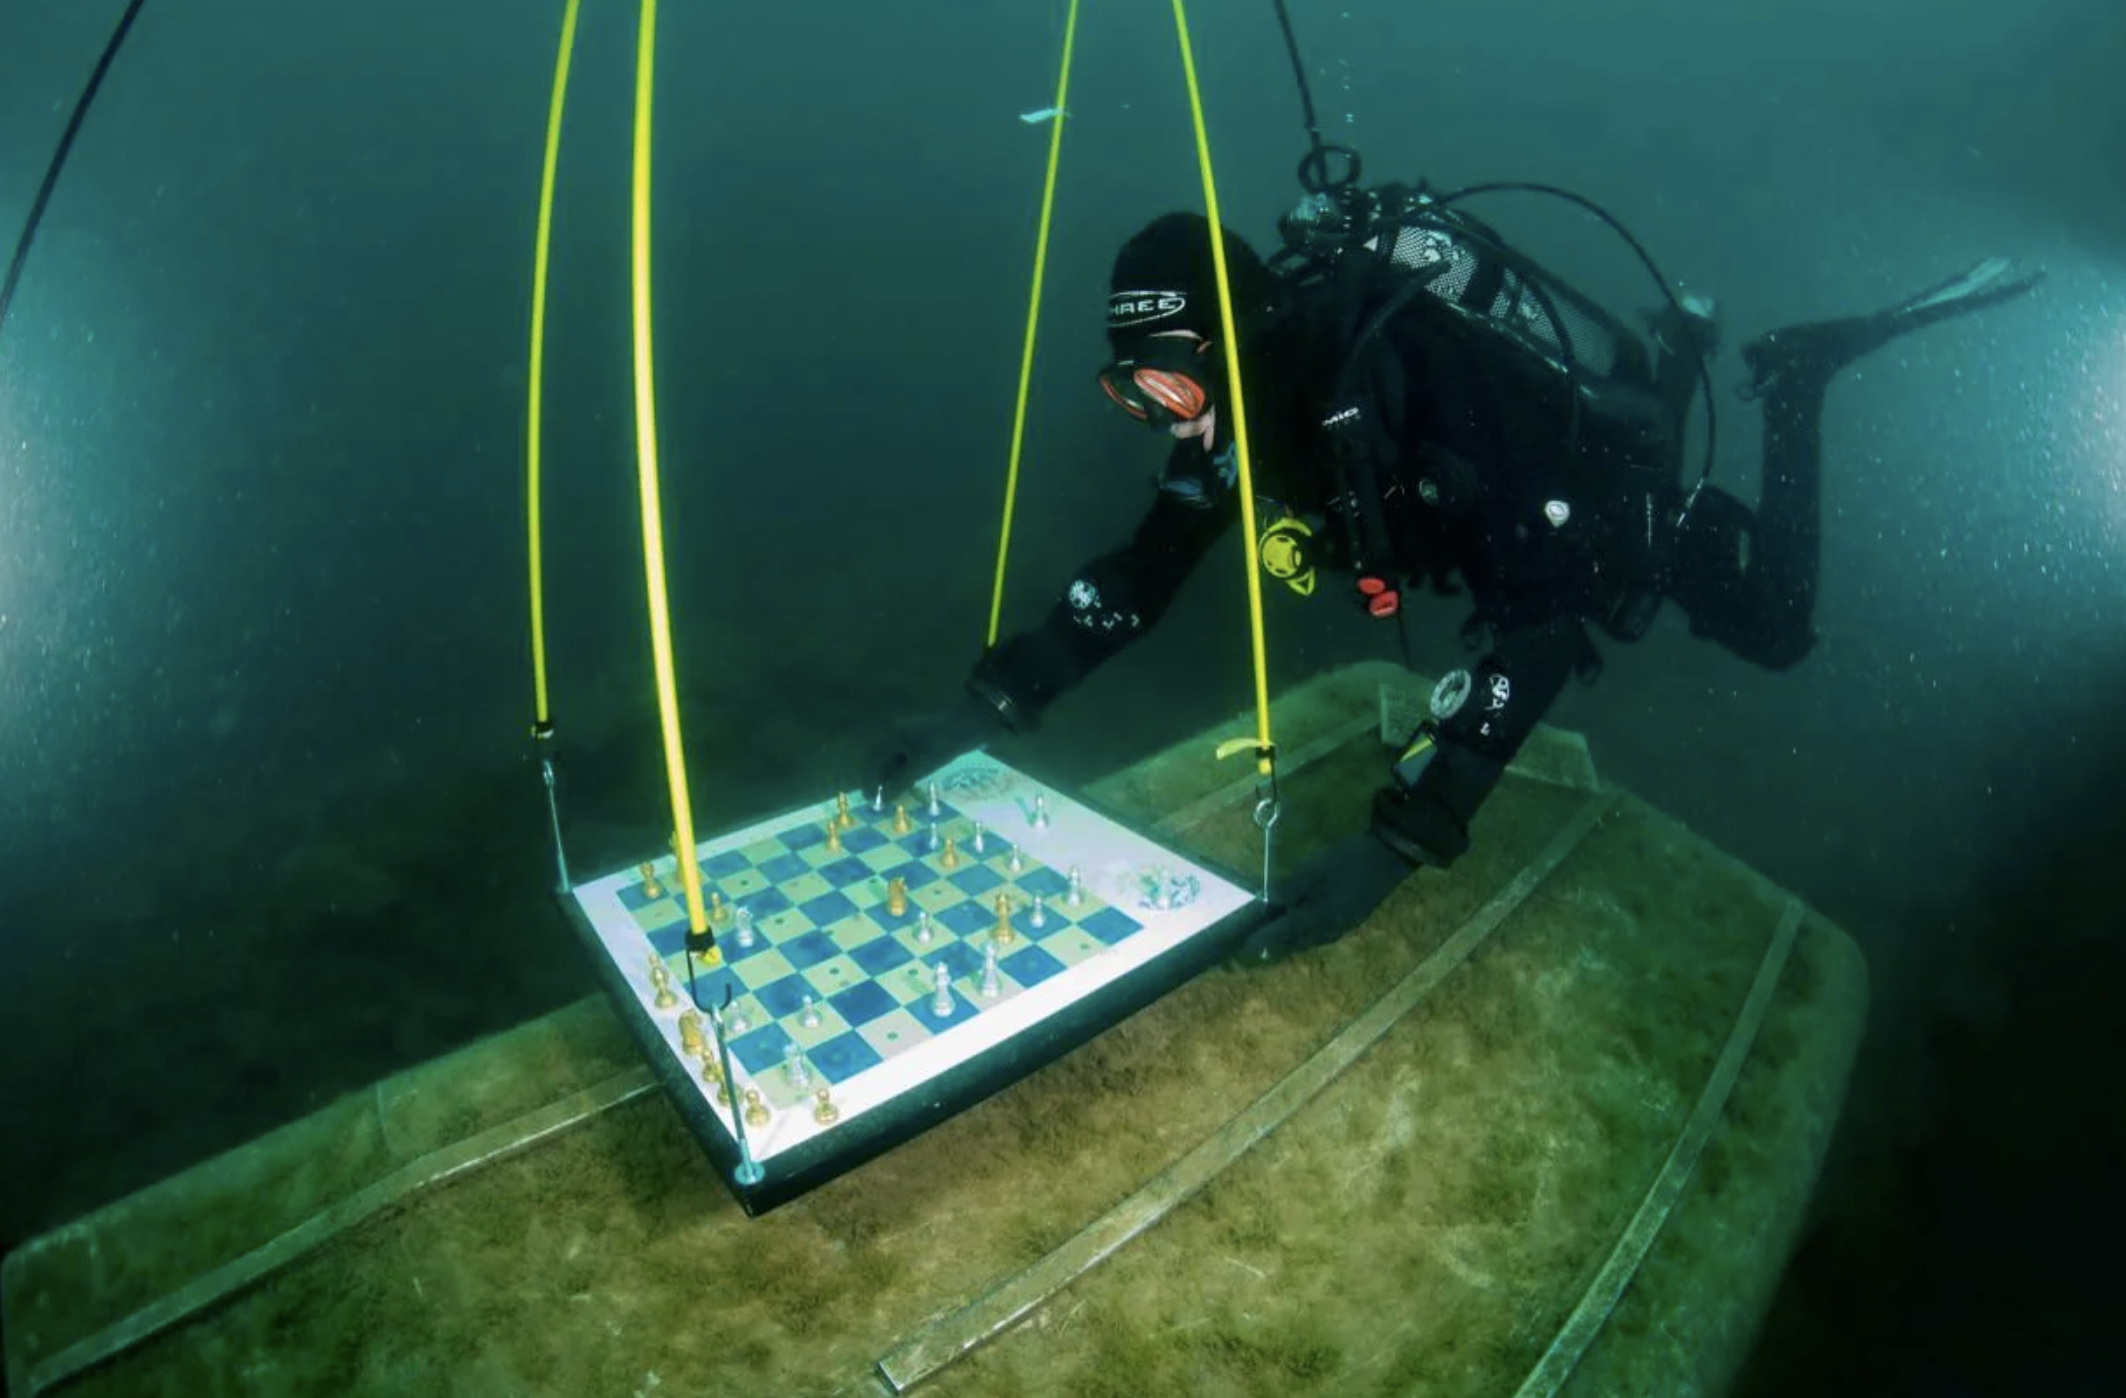 A diver has a chess board resting on some form of algae-covered metal